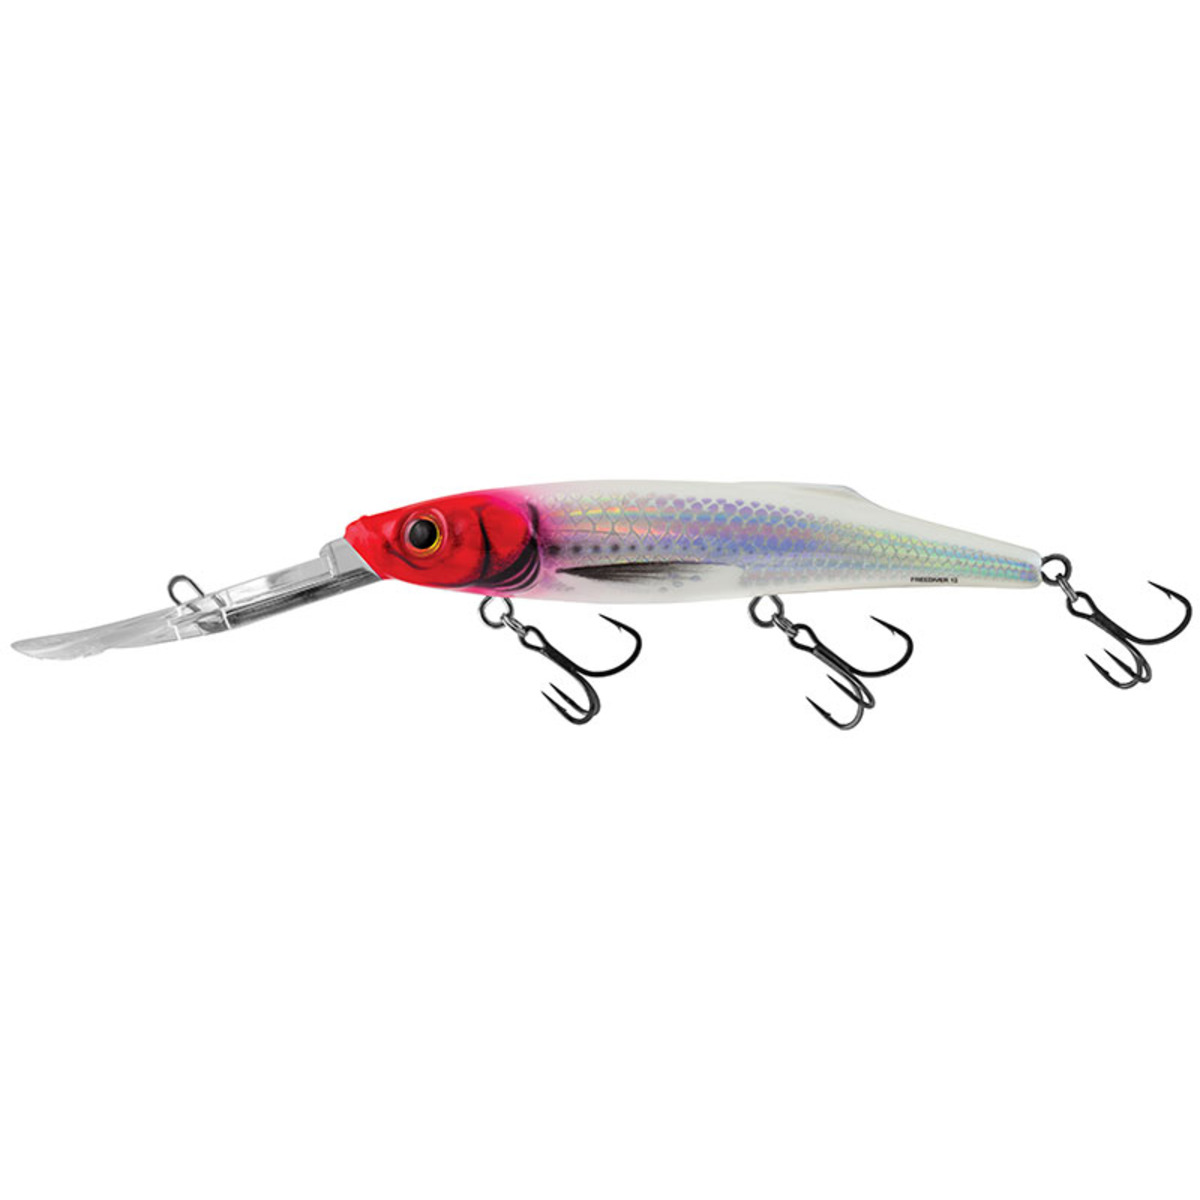 Salmo Freediver Super Deep Runner - 12 Cm - Holographic Red Head